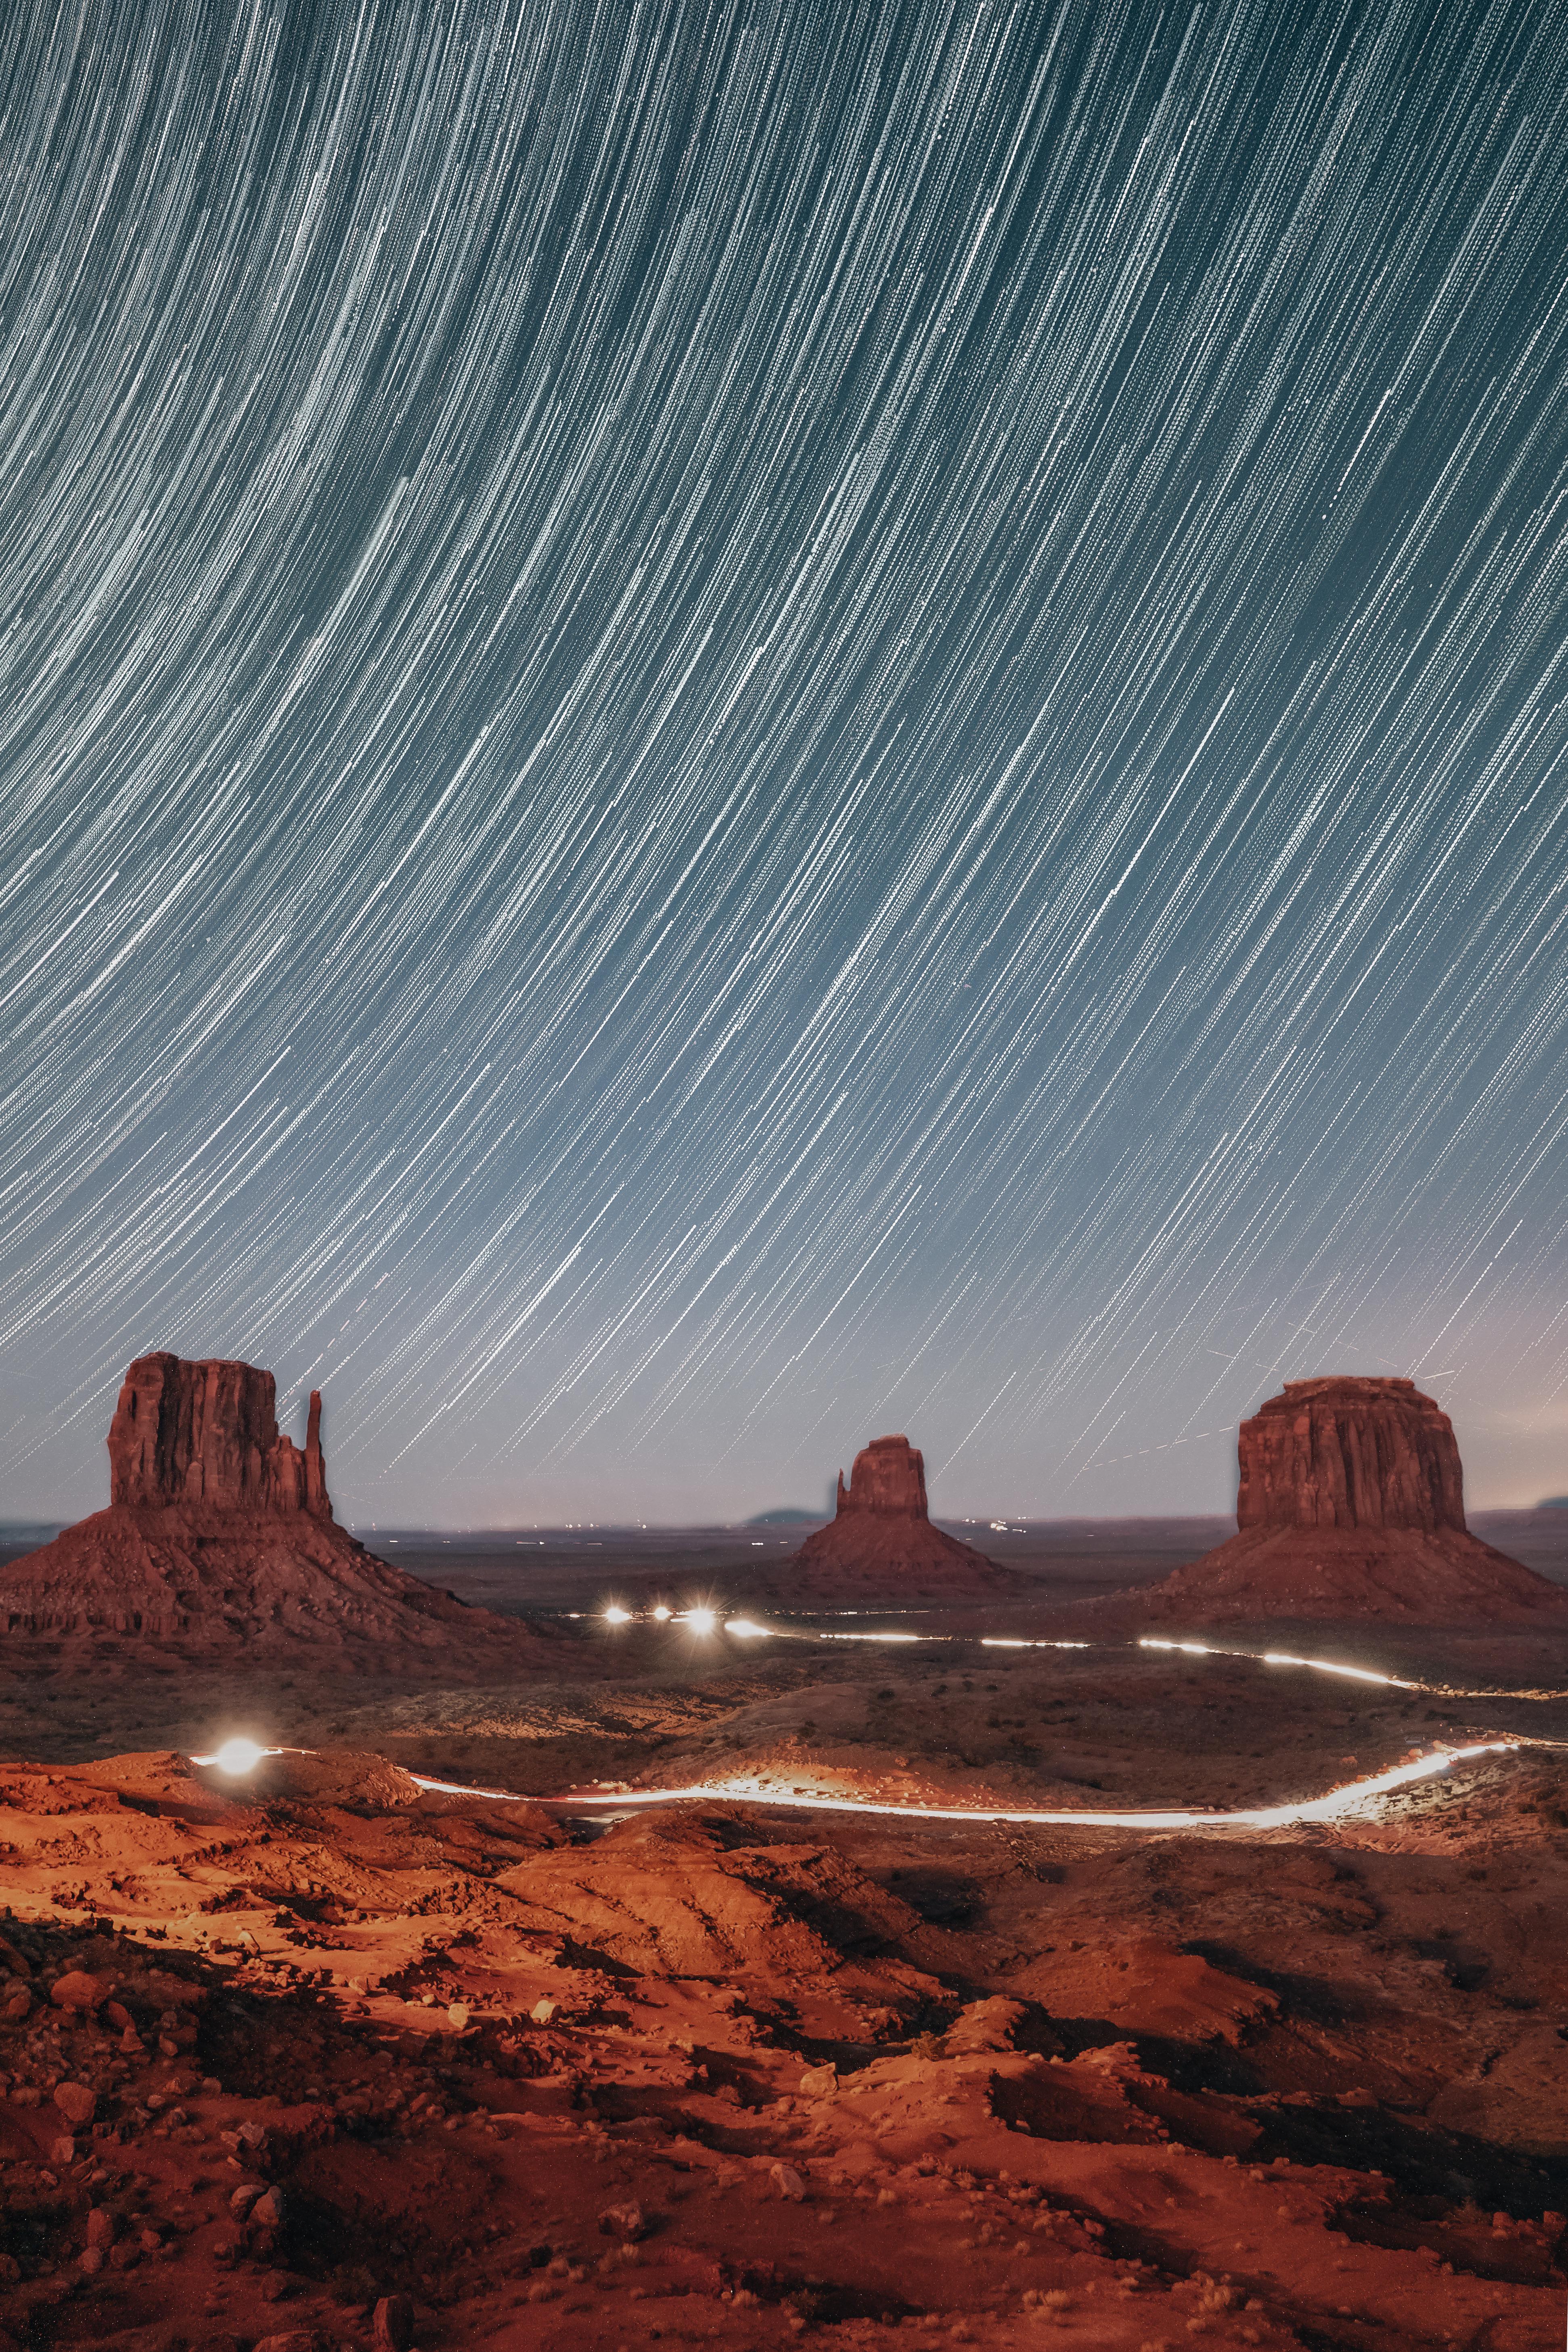 200ish images stacked. Monument Valley. Nearly killed my poor computer to edit.